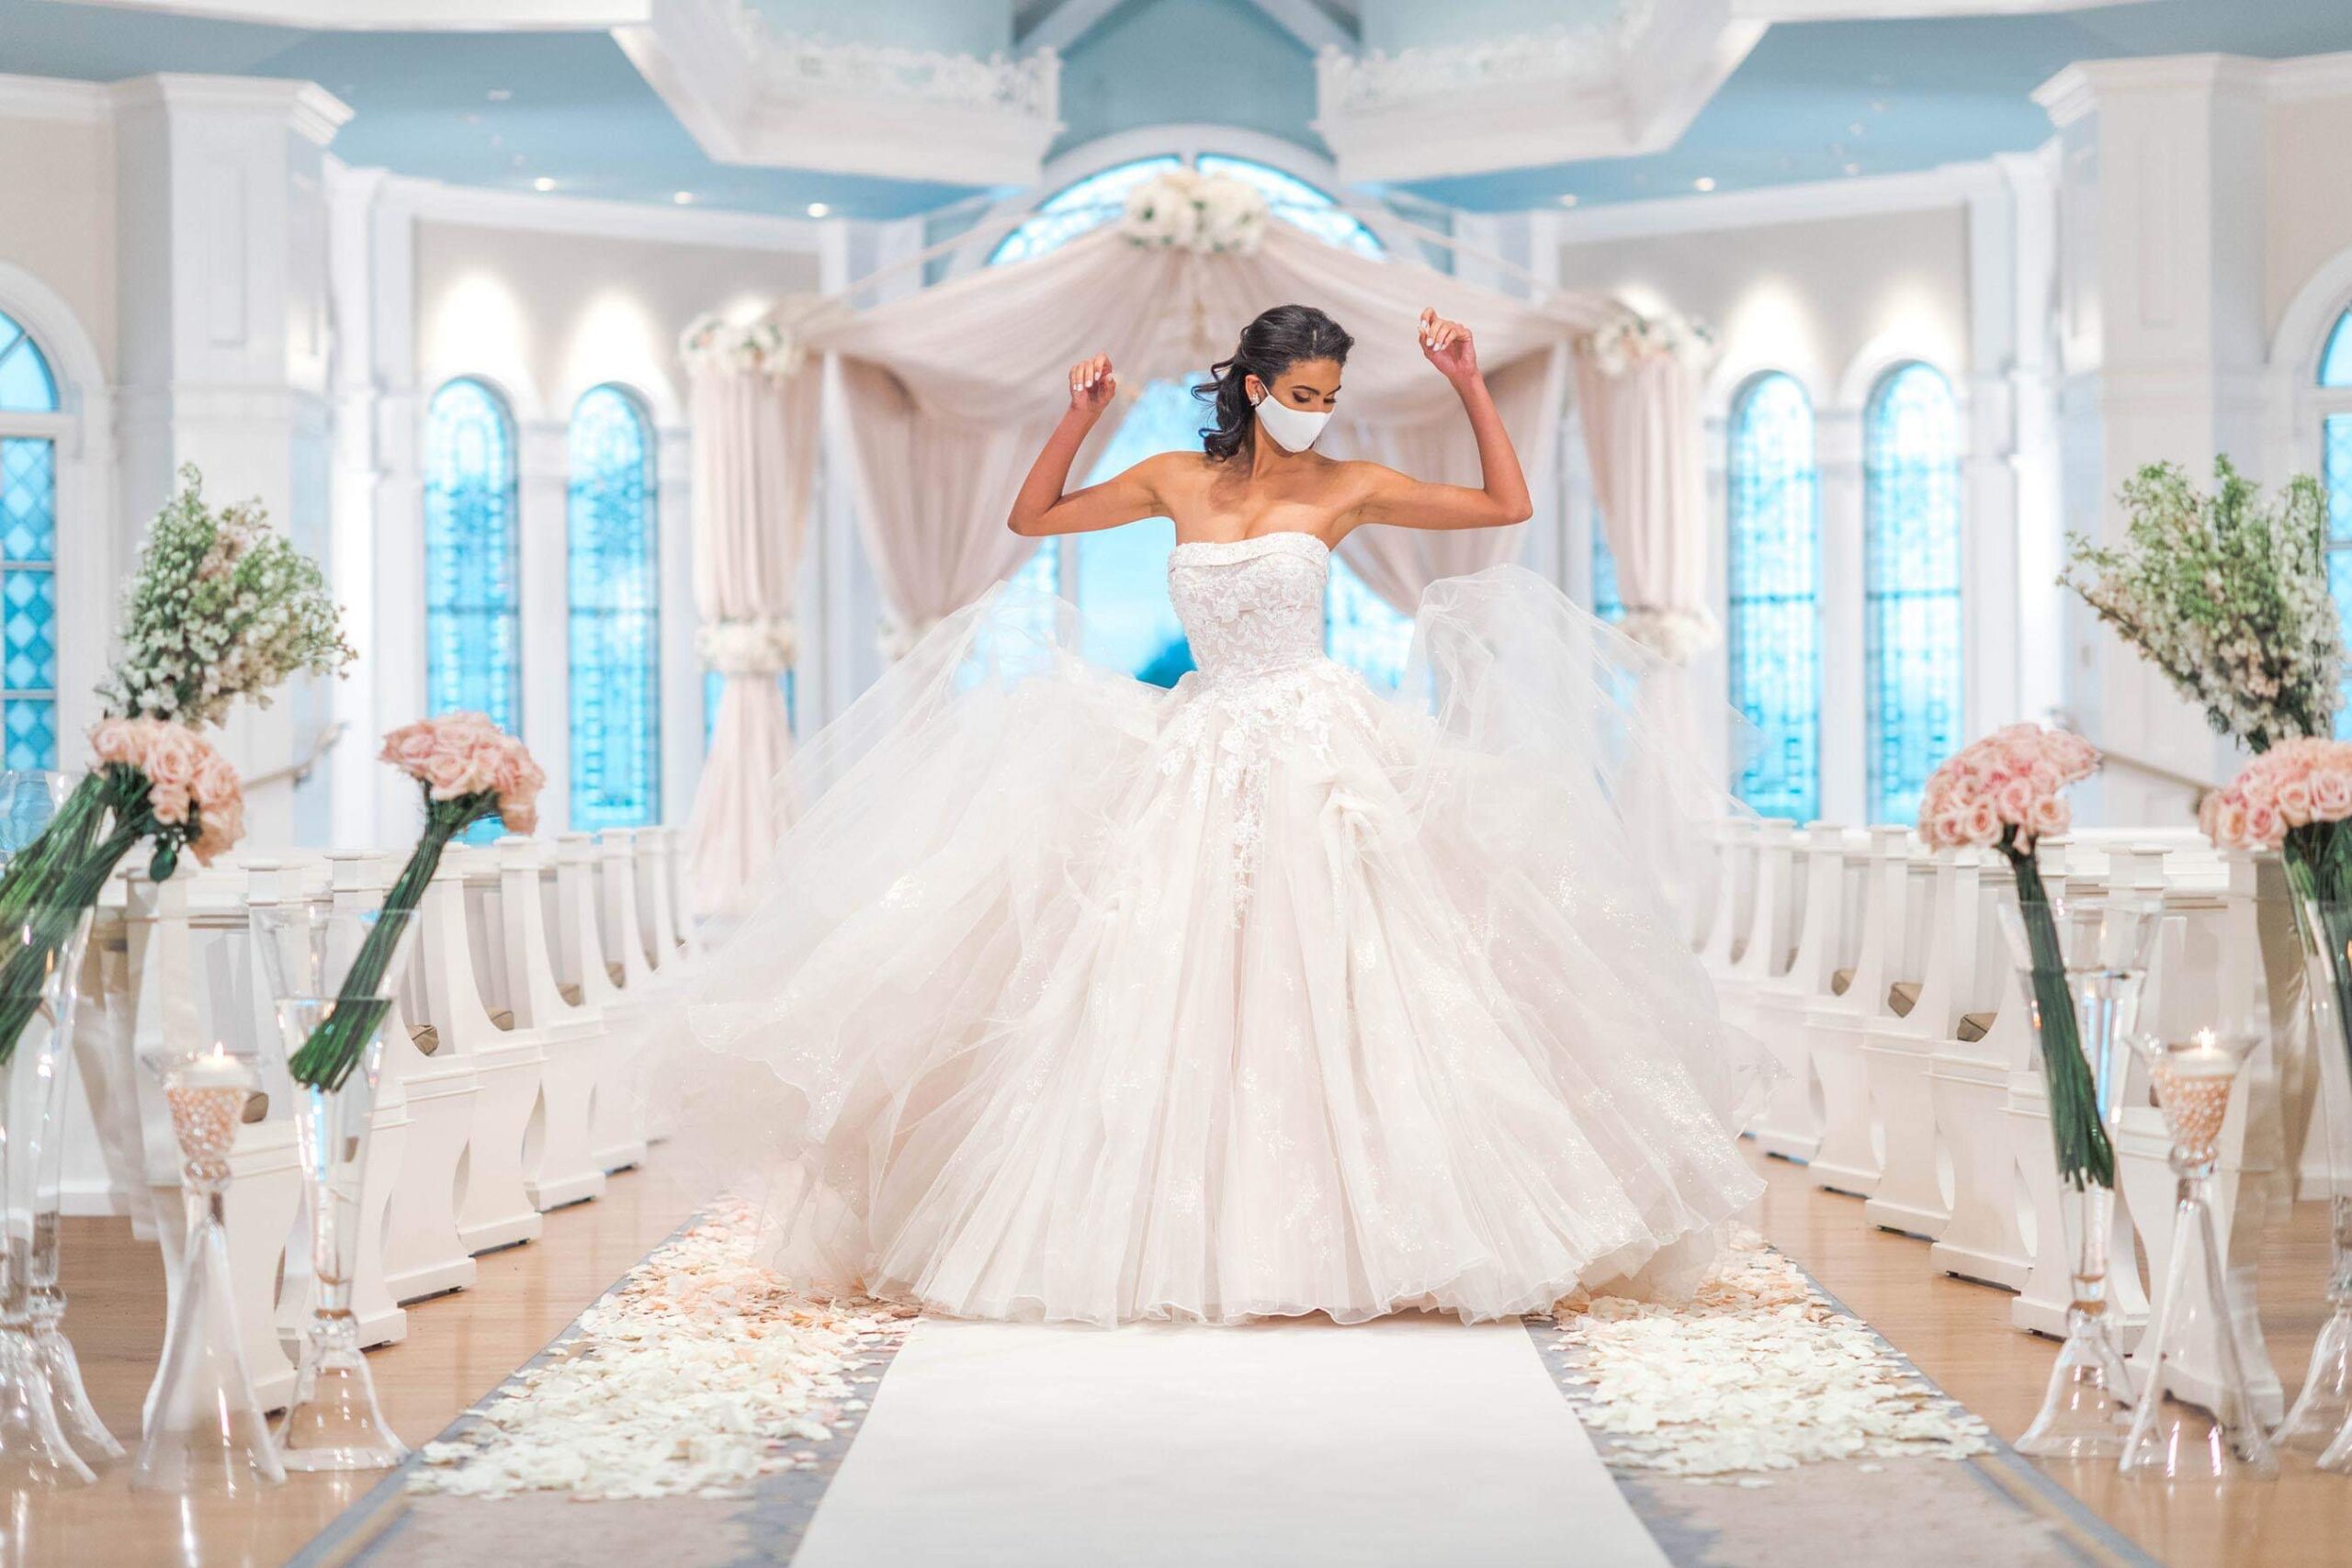 First Look At The New 2021 Disney Fairytale Wedding Dress